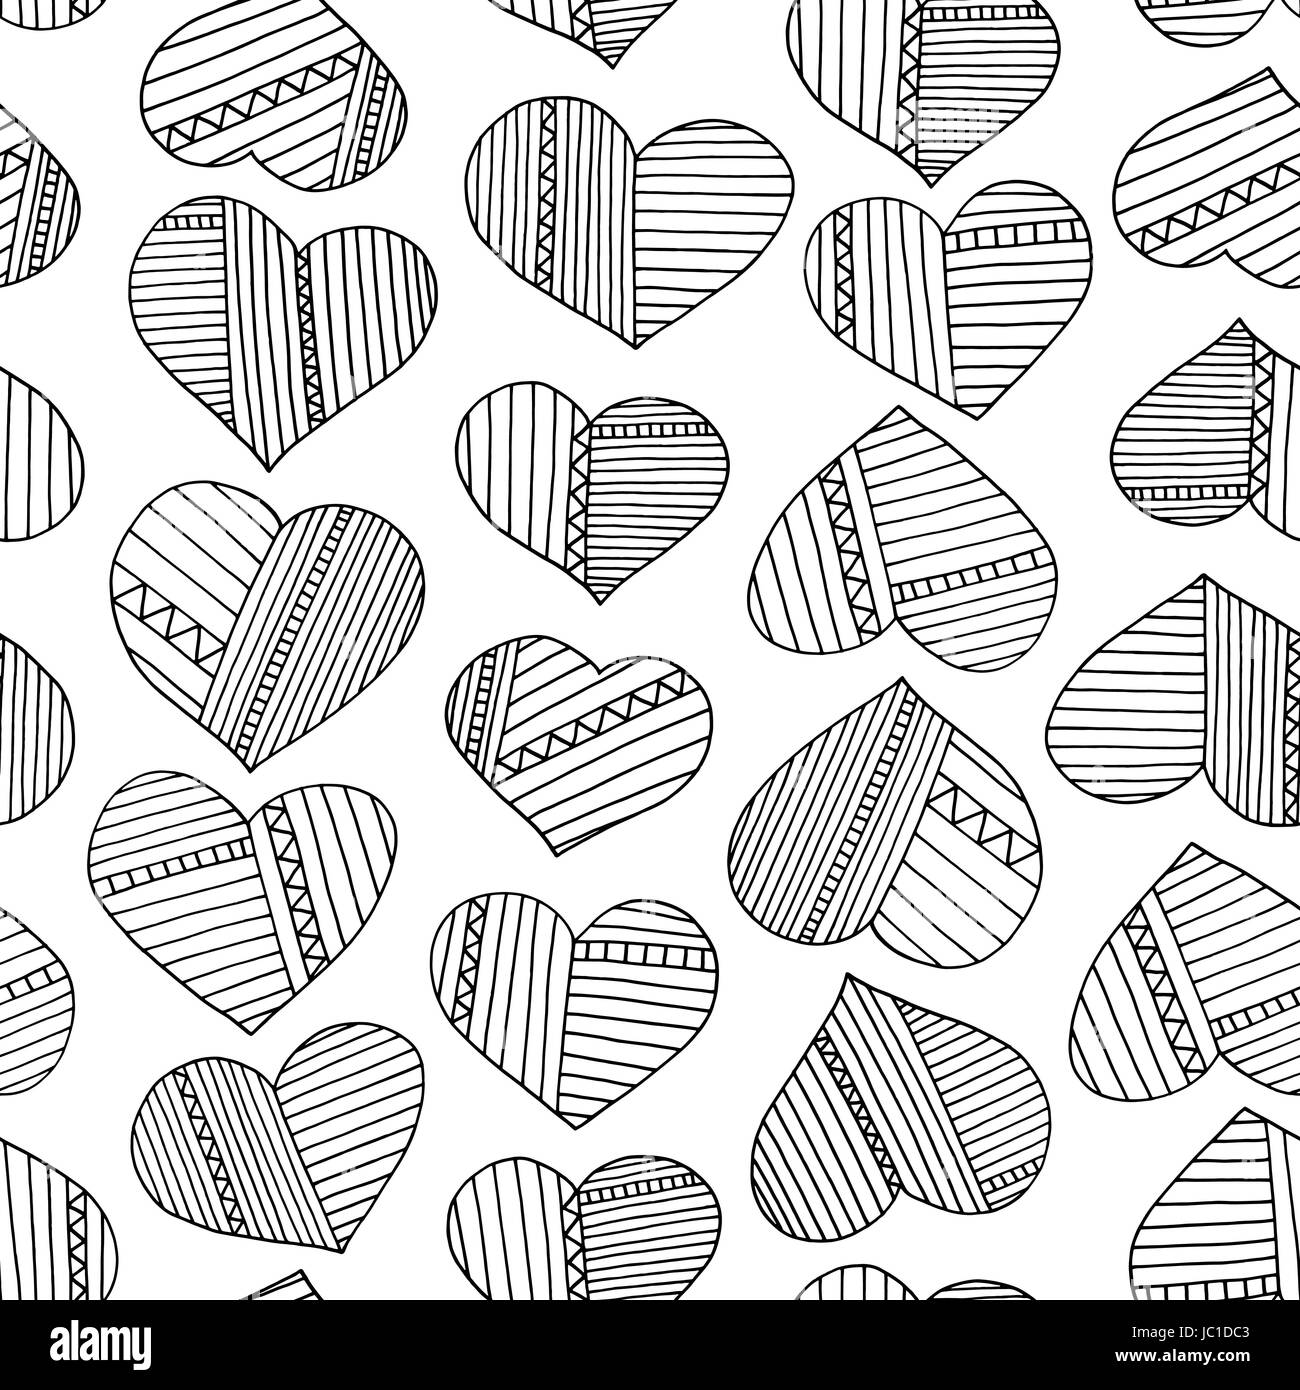 Hearts and stripes hand drawn abstract pattern. Vector seamless background for wallpaper, wrapping, textile design, surface texture, fabric. Stock Vector